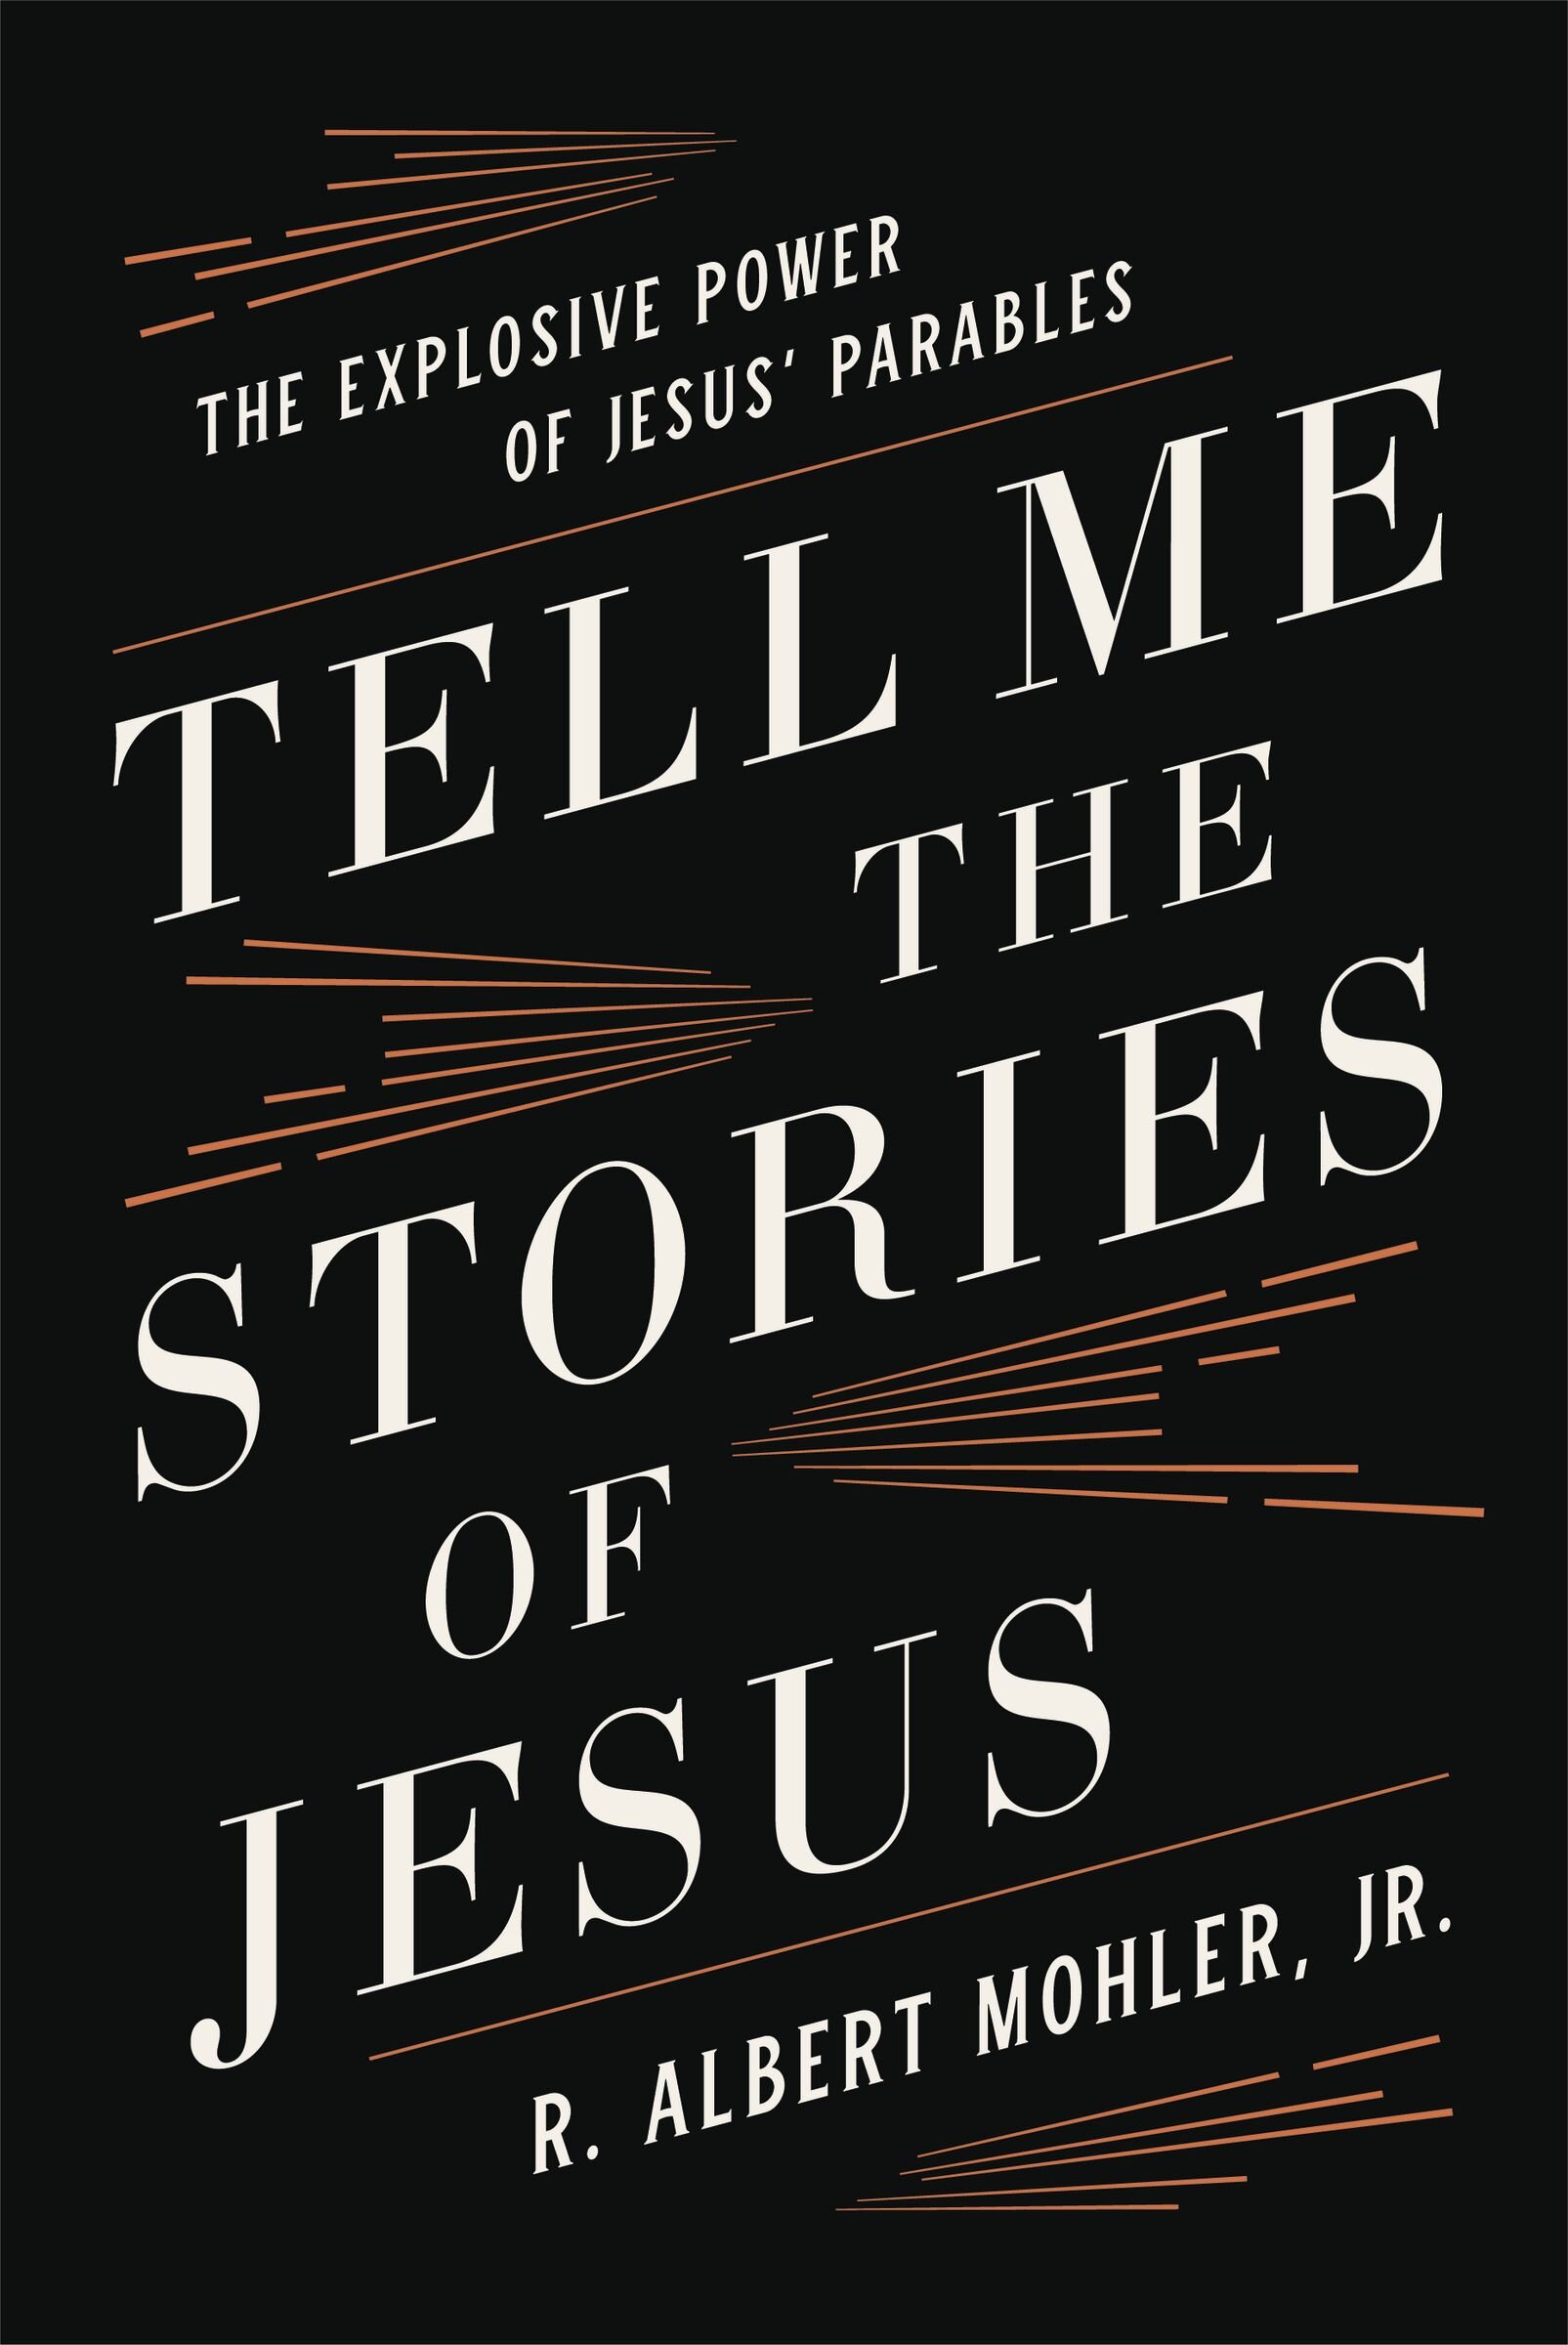 Tell Me the Stories of Jesus: The Explosive Power of Jesus’ Parables